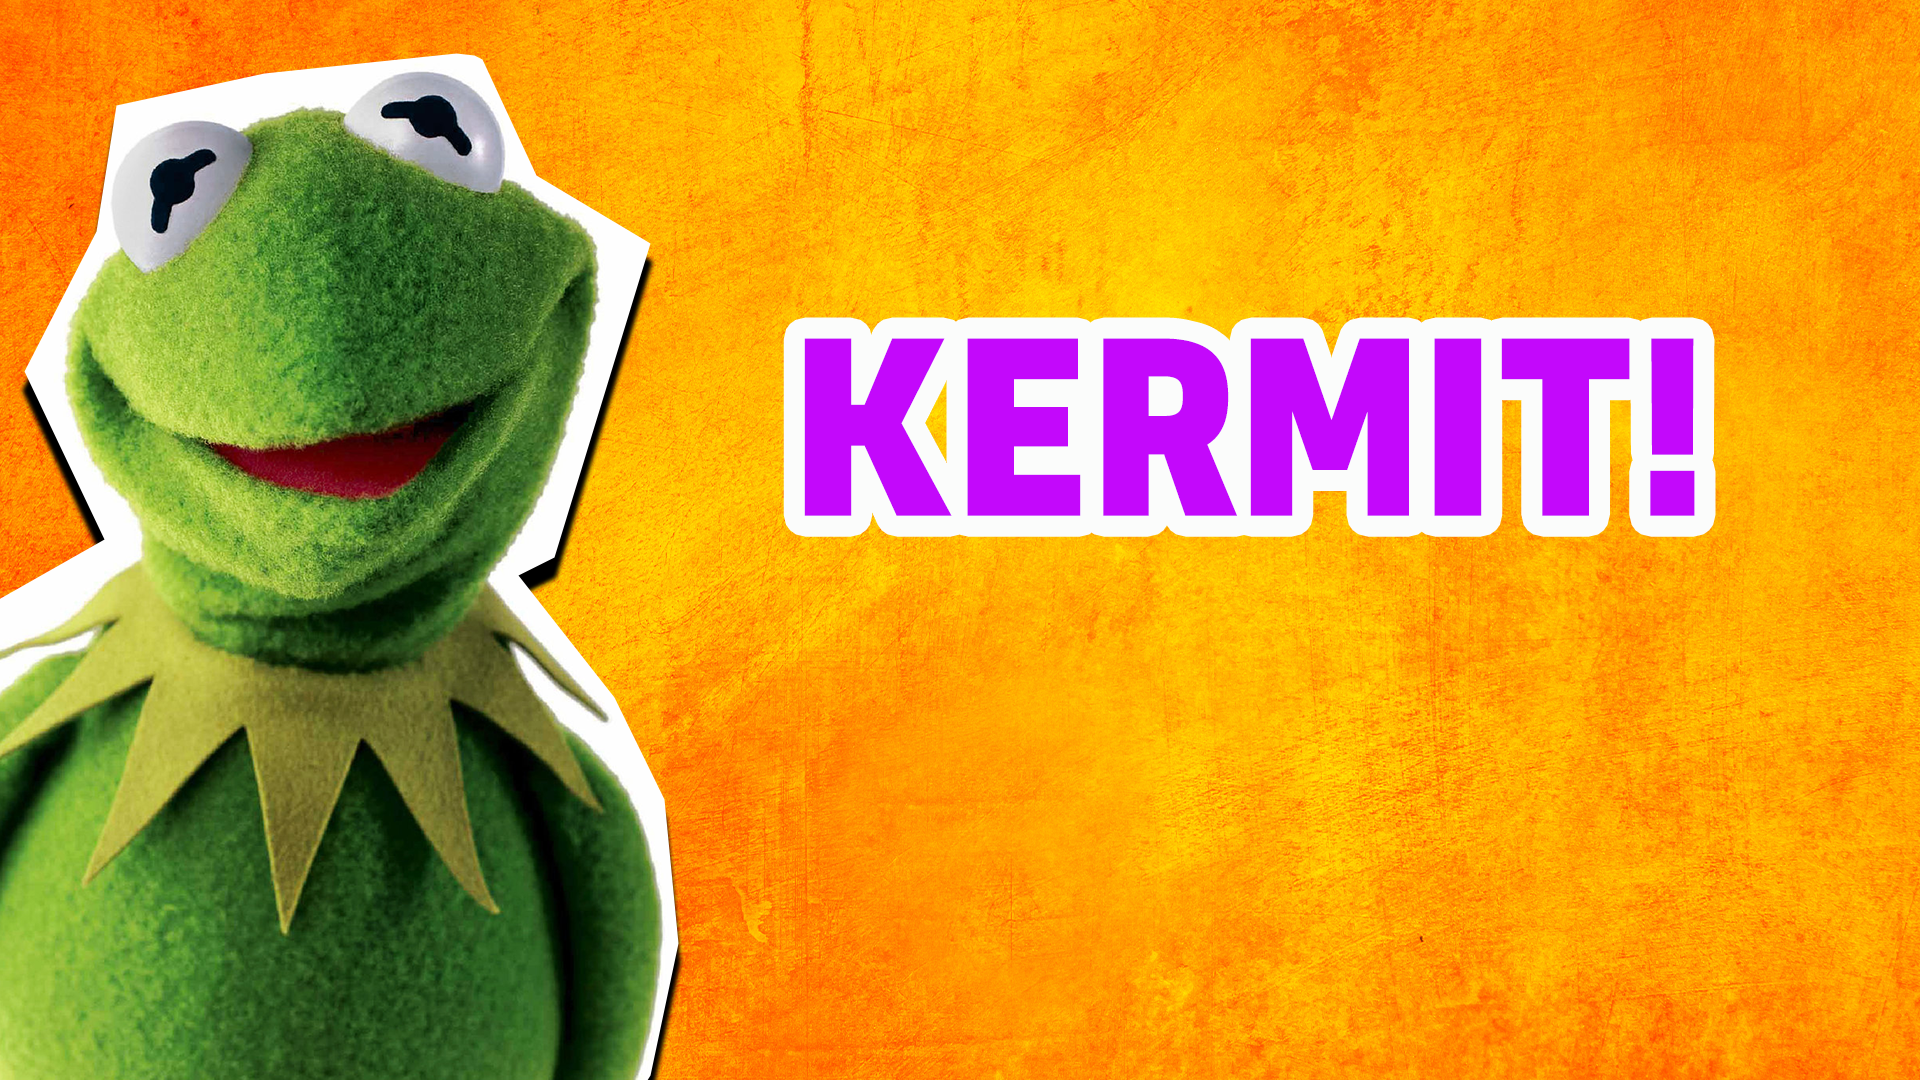 You're most like Kermit! You're fun loving, big hearted and you ALWAYS look out for your friends! And better yet - they always look out for you!